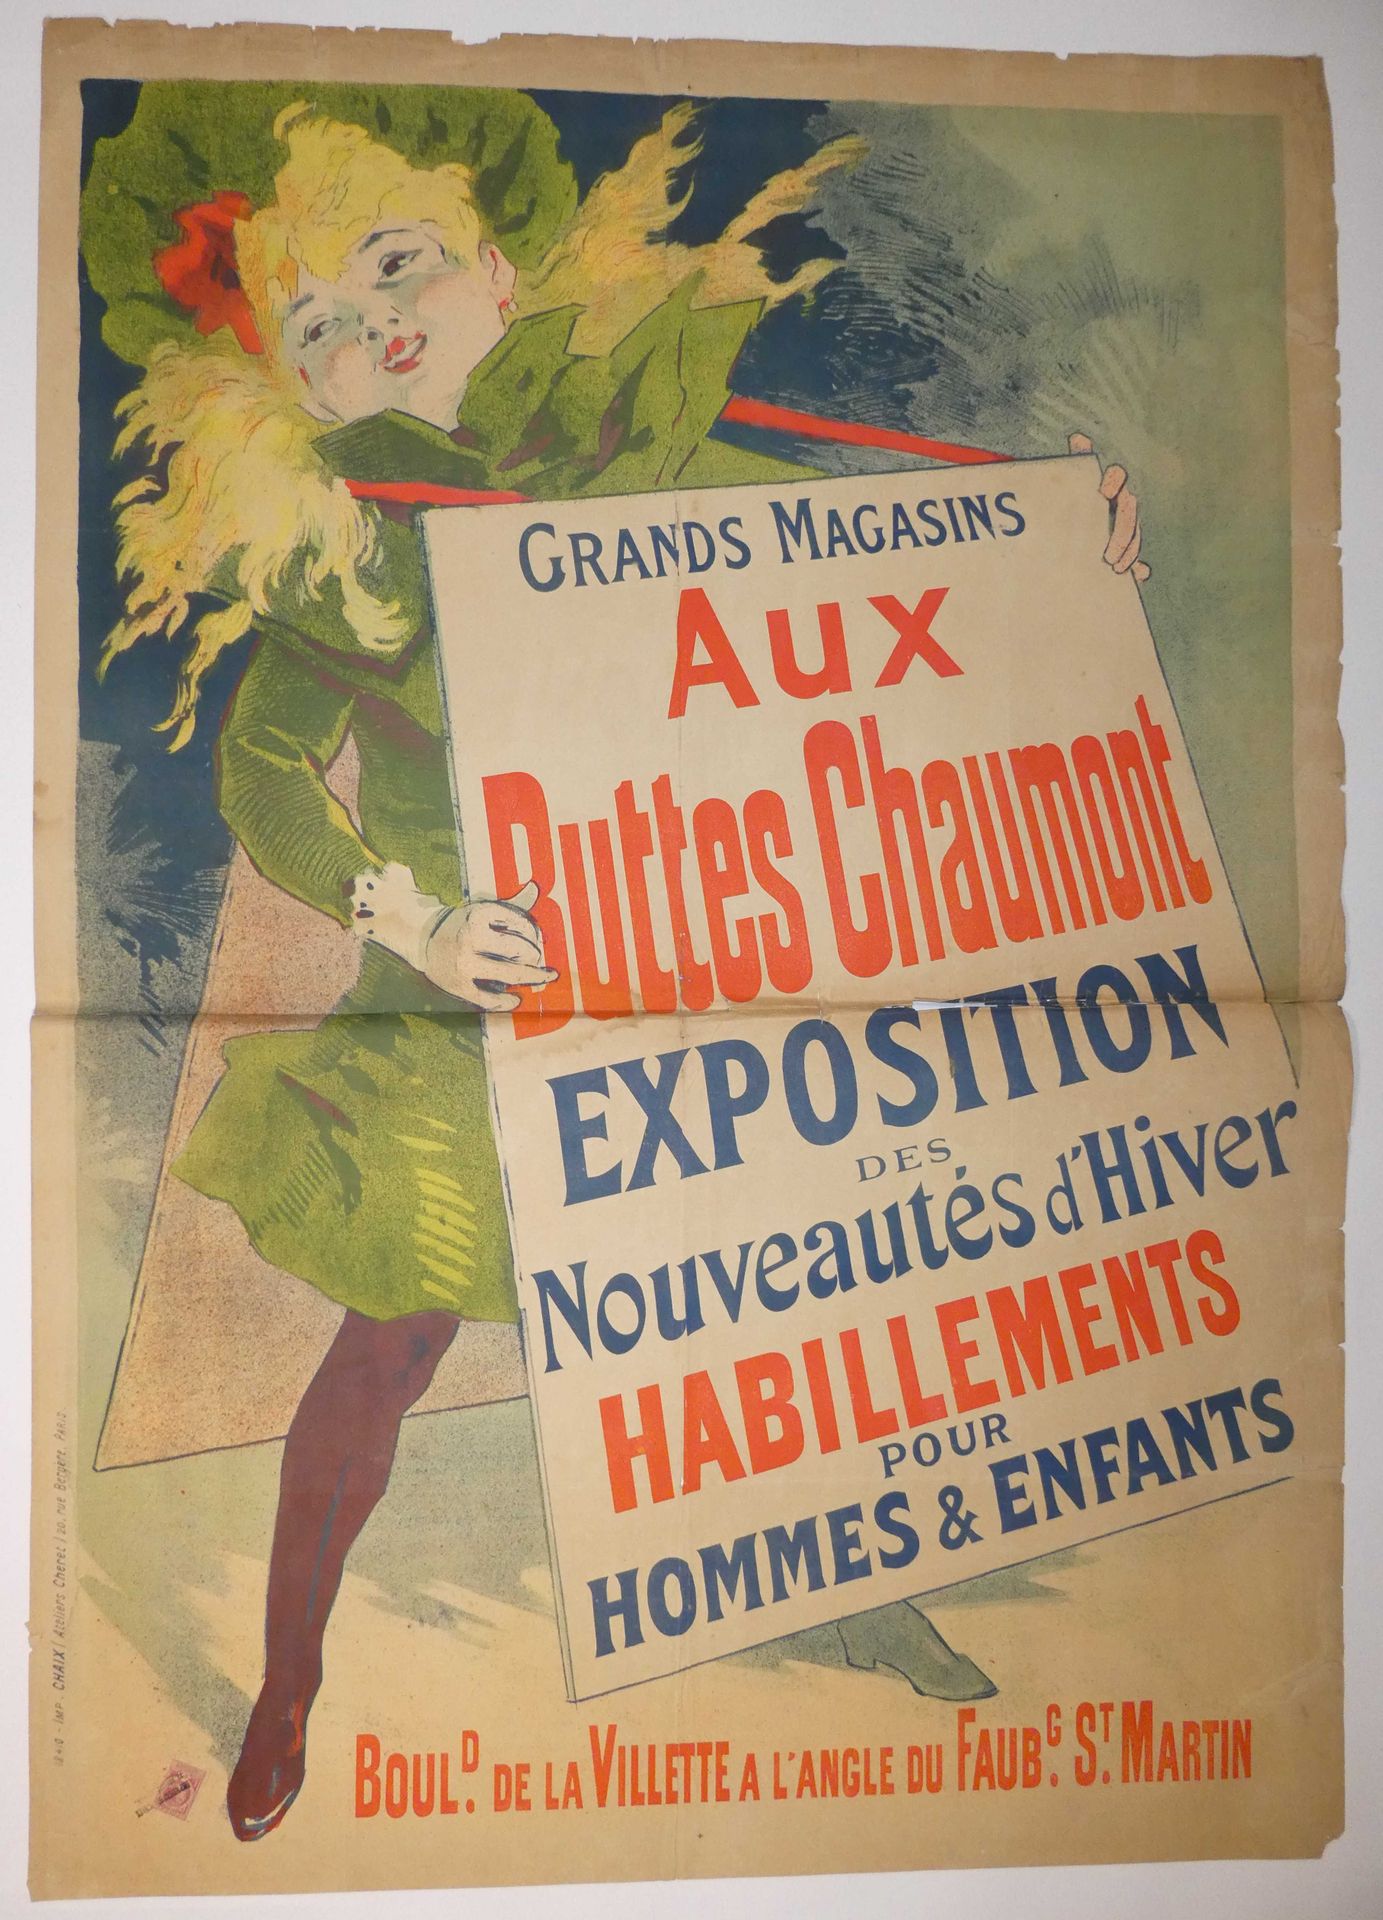 Null 归功于Jules CHERET (1836-1932)的《Grands Magasins》。Aux Buttes Chaumont冬季新产品展"。由C&hellip;